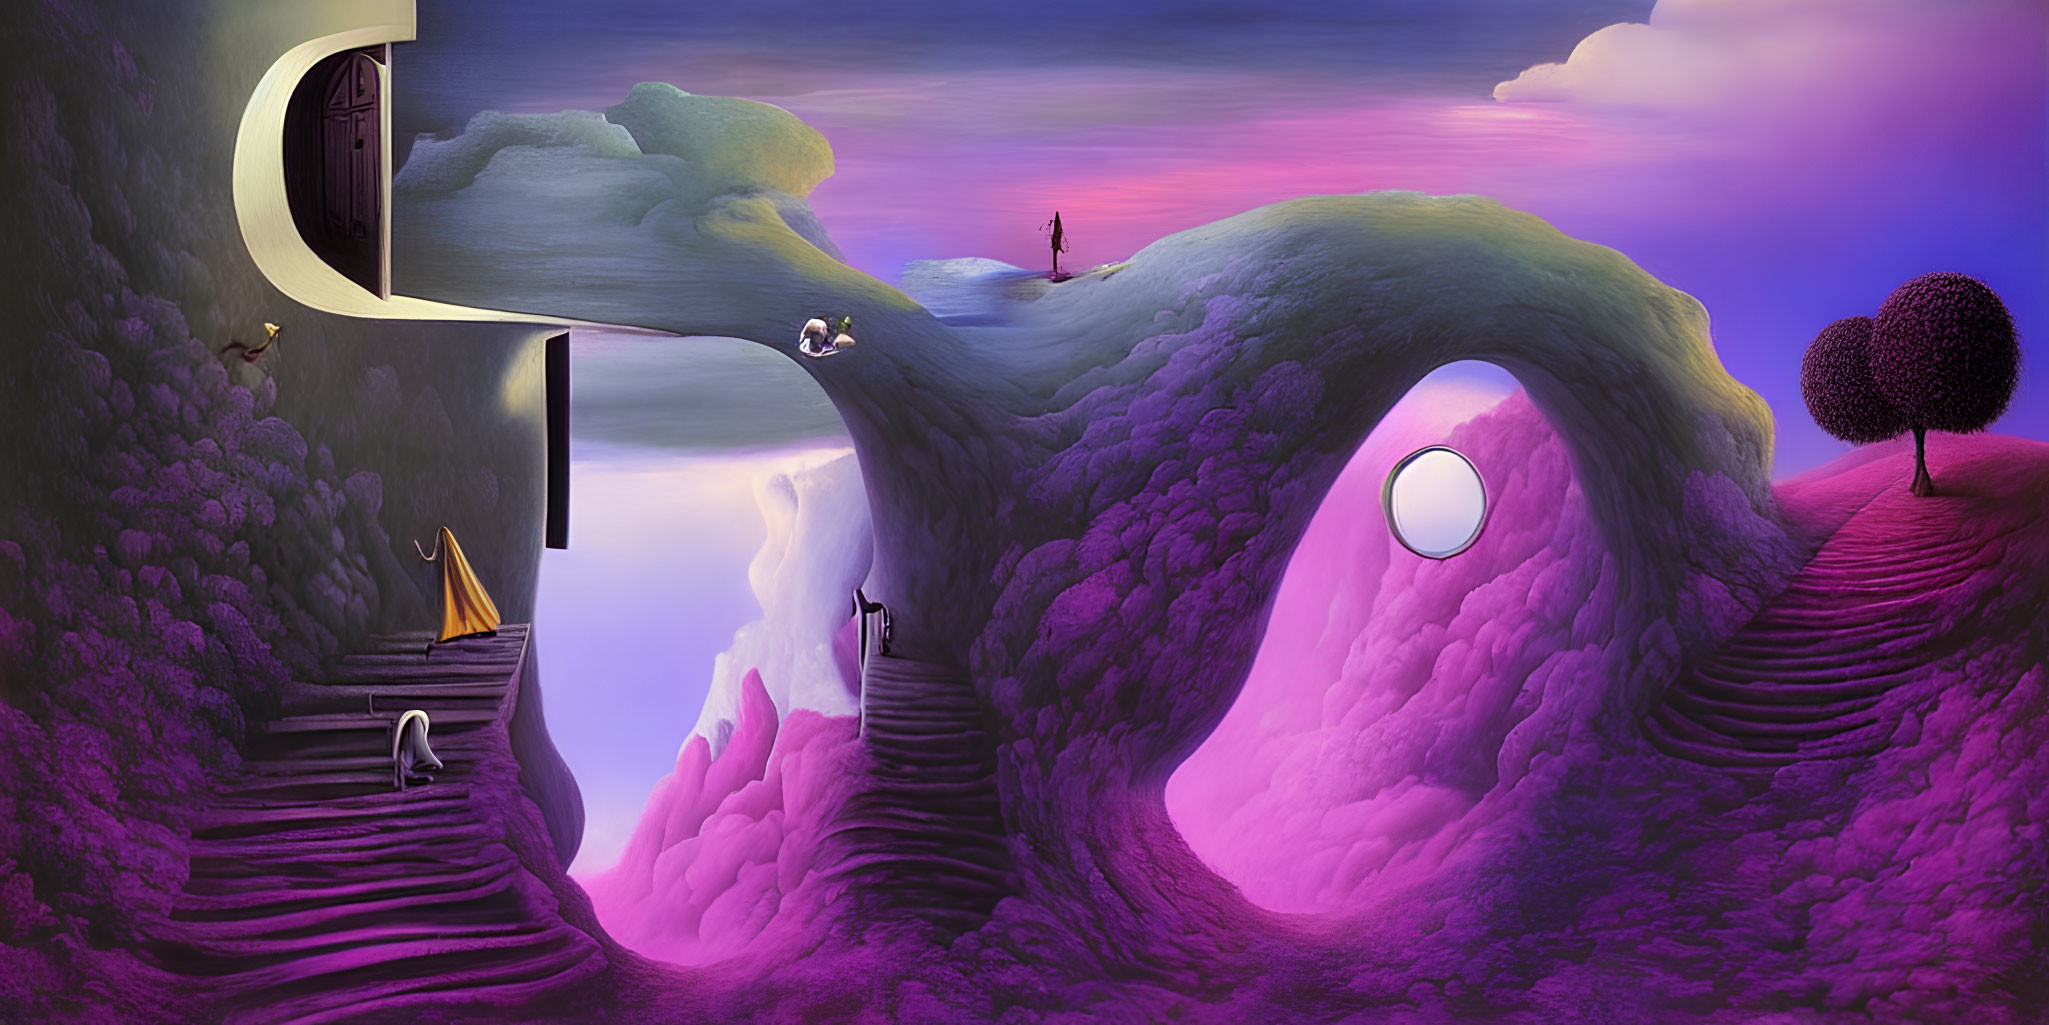 Surreal Purple Landscape with Undulating Terrain and Whimsical Structures